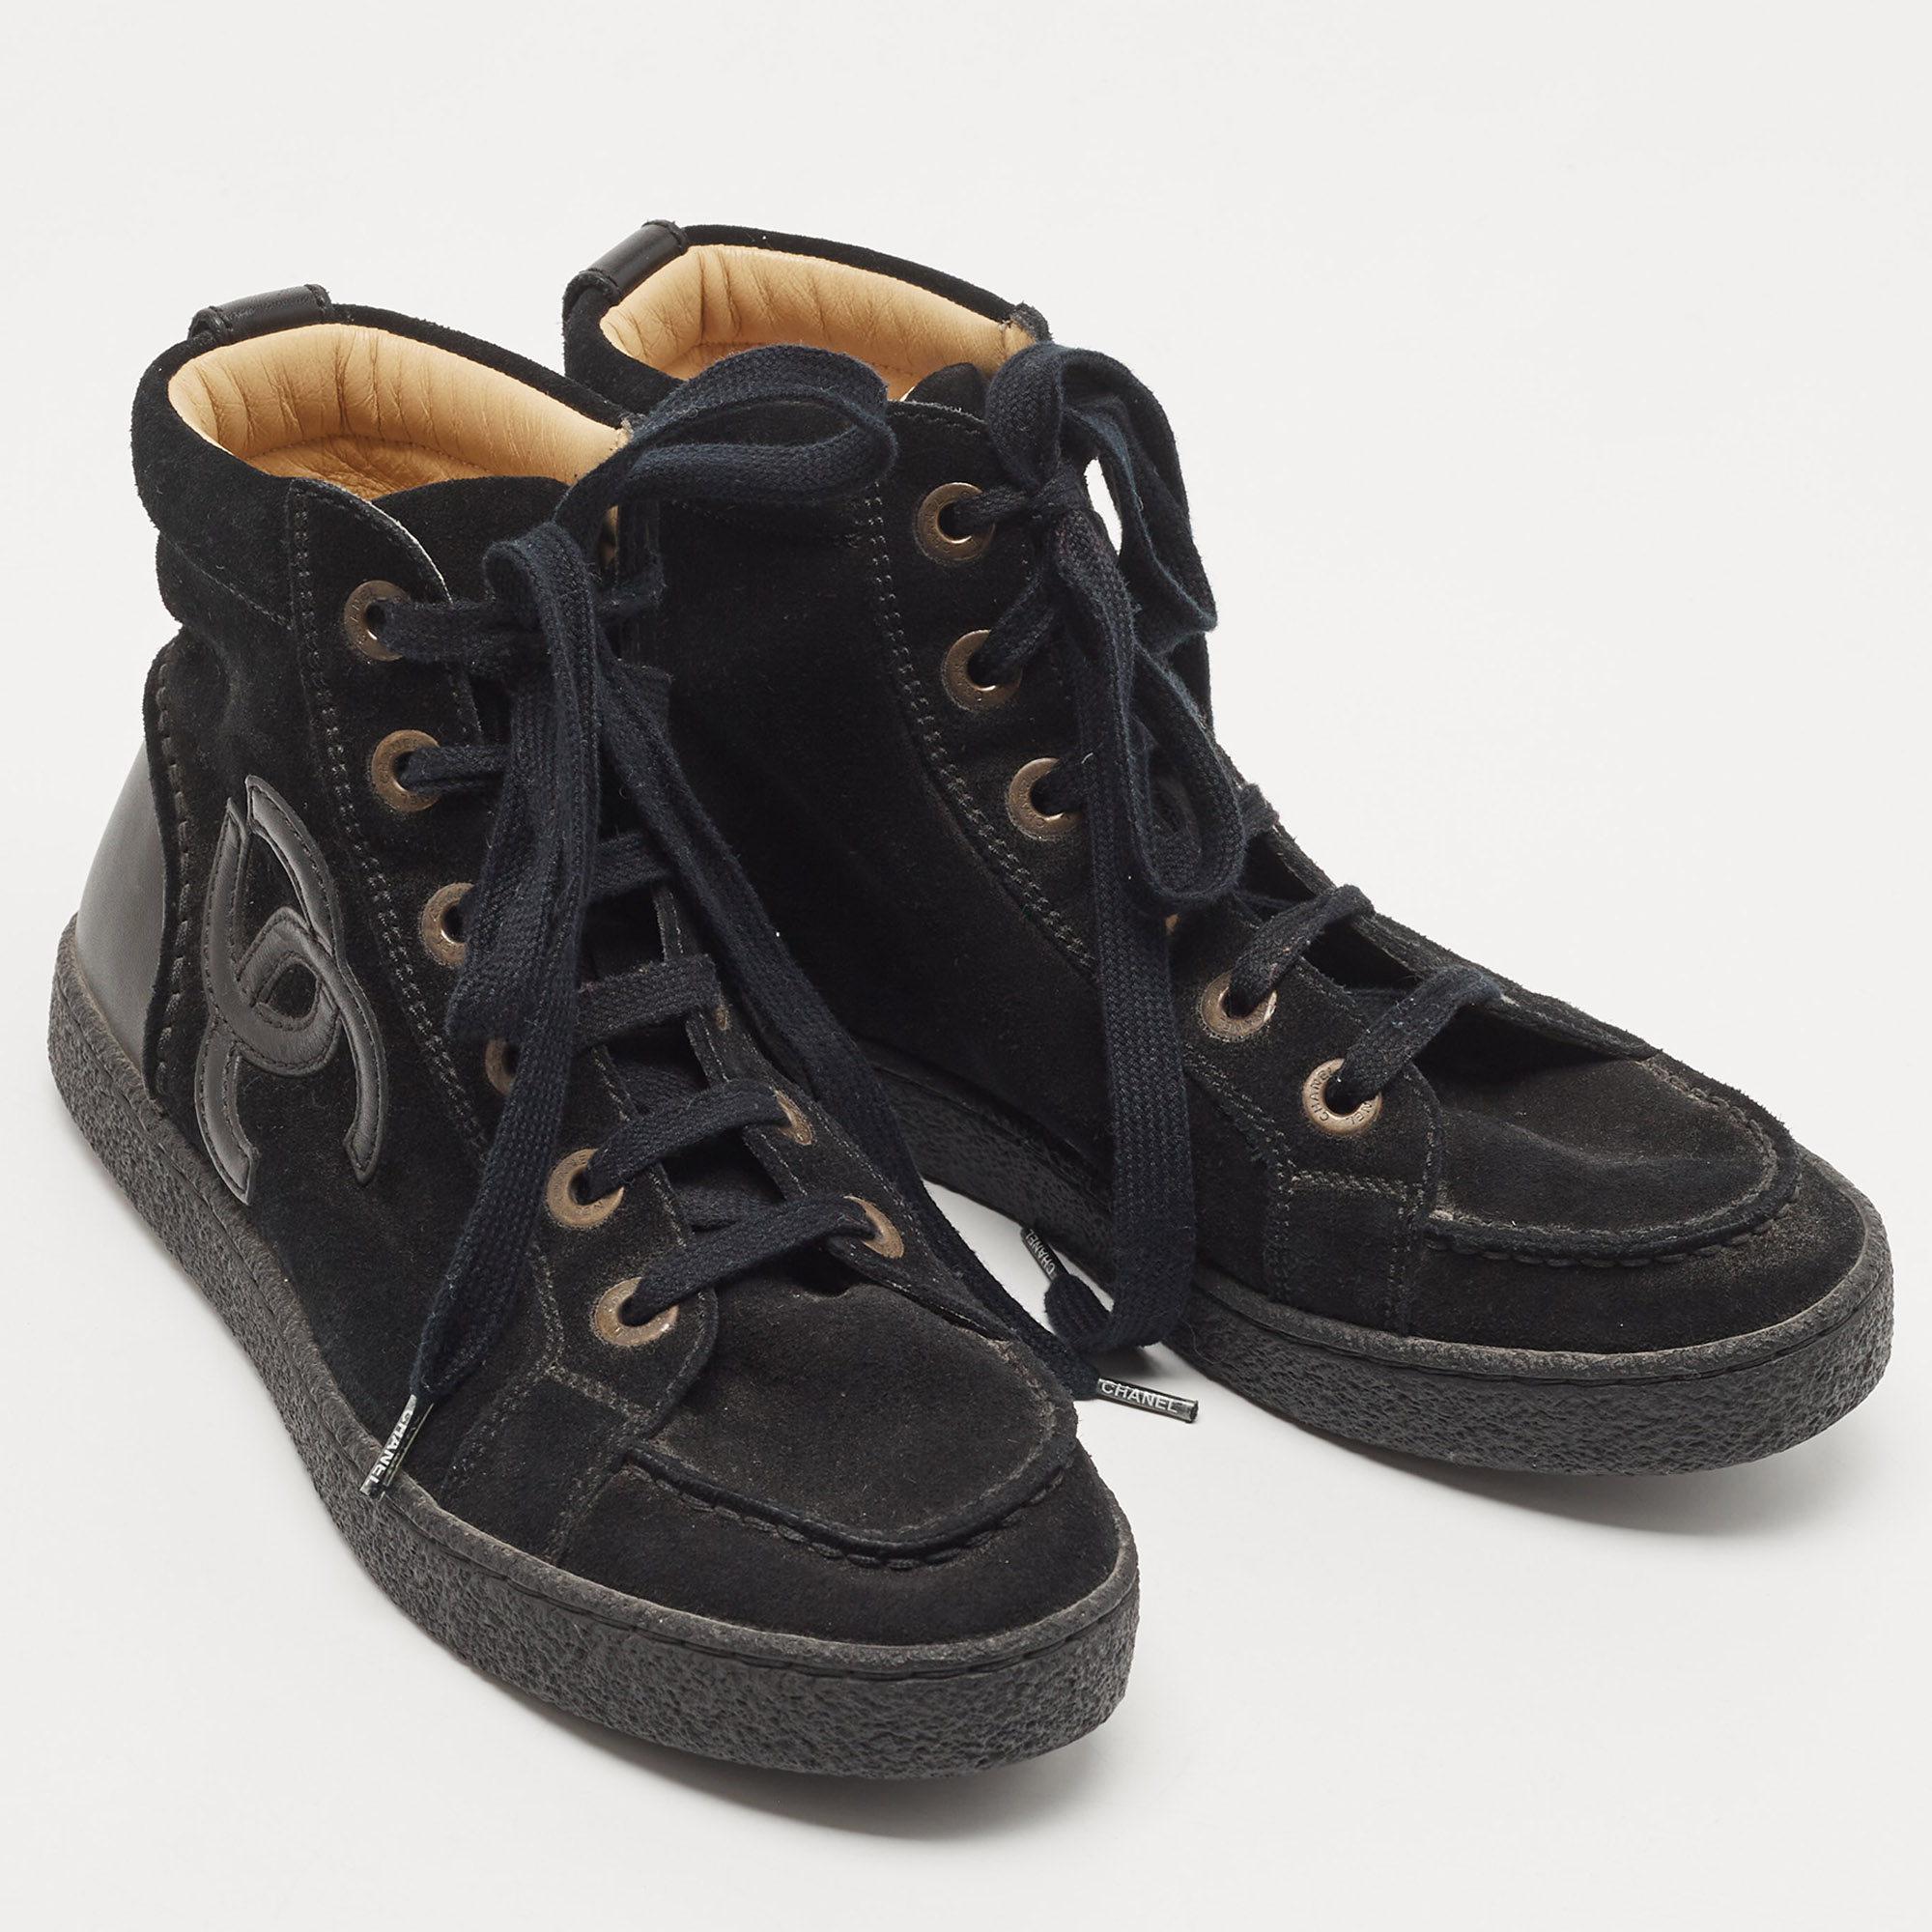 Chanel Black Leather And Suede CC High Top Sneakers Size 37